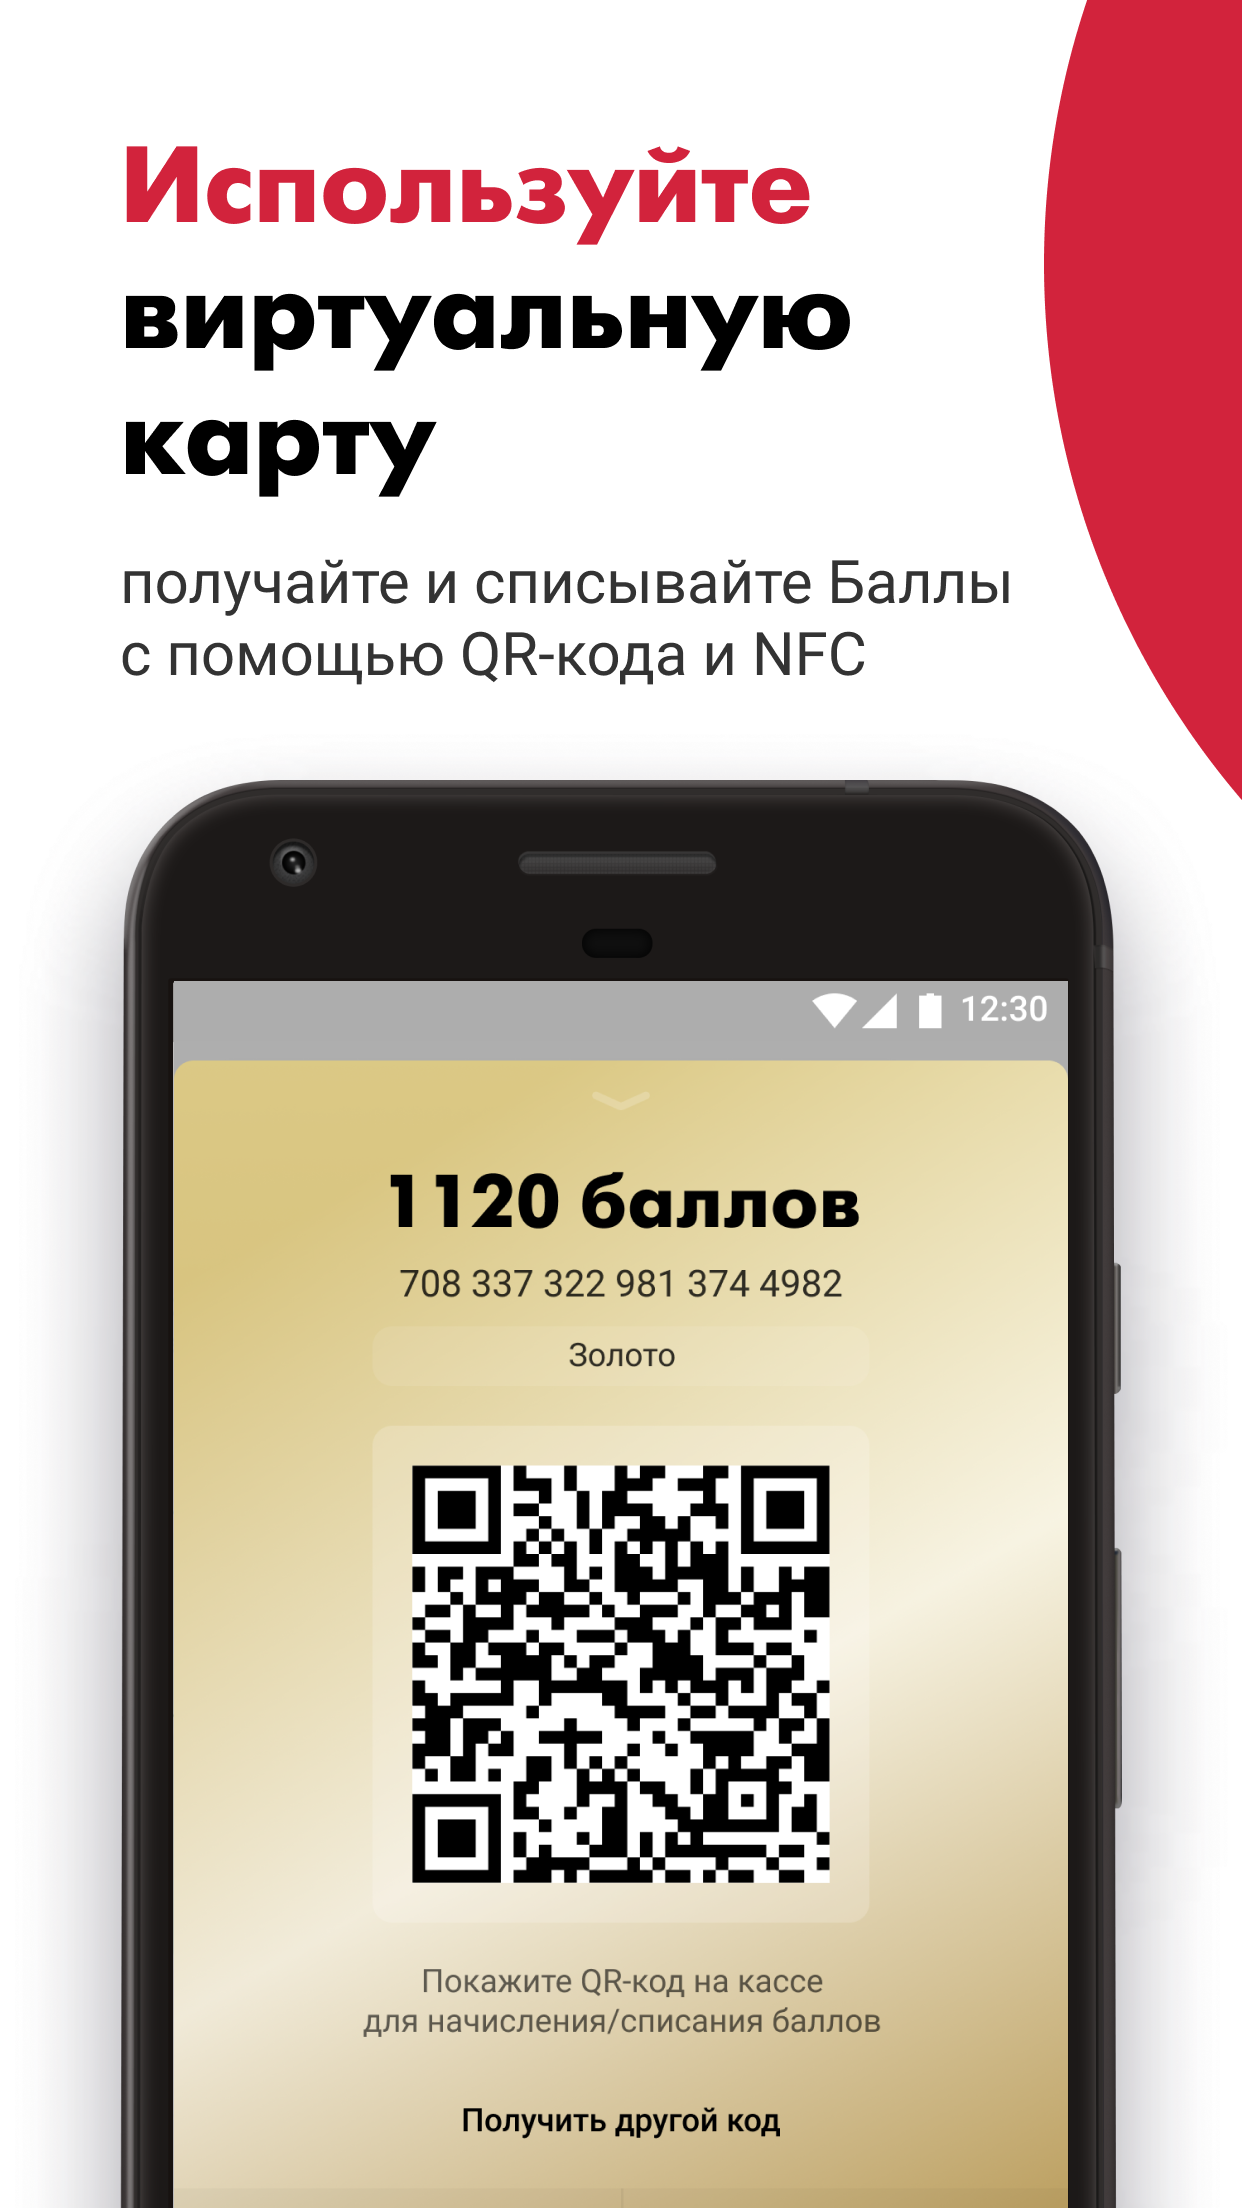 Android application АЗС ЛУКОЙЛ screenshort